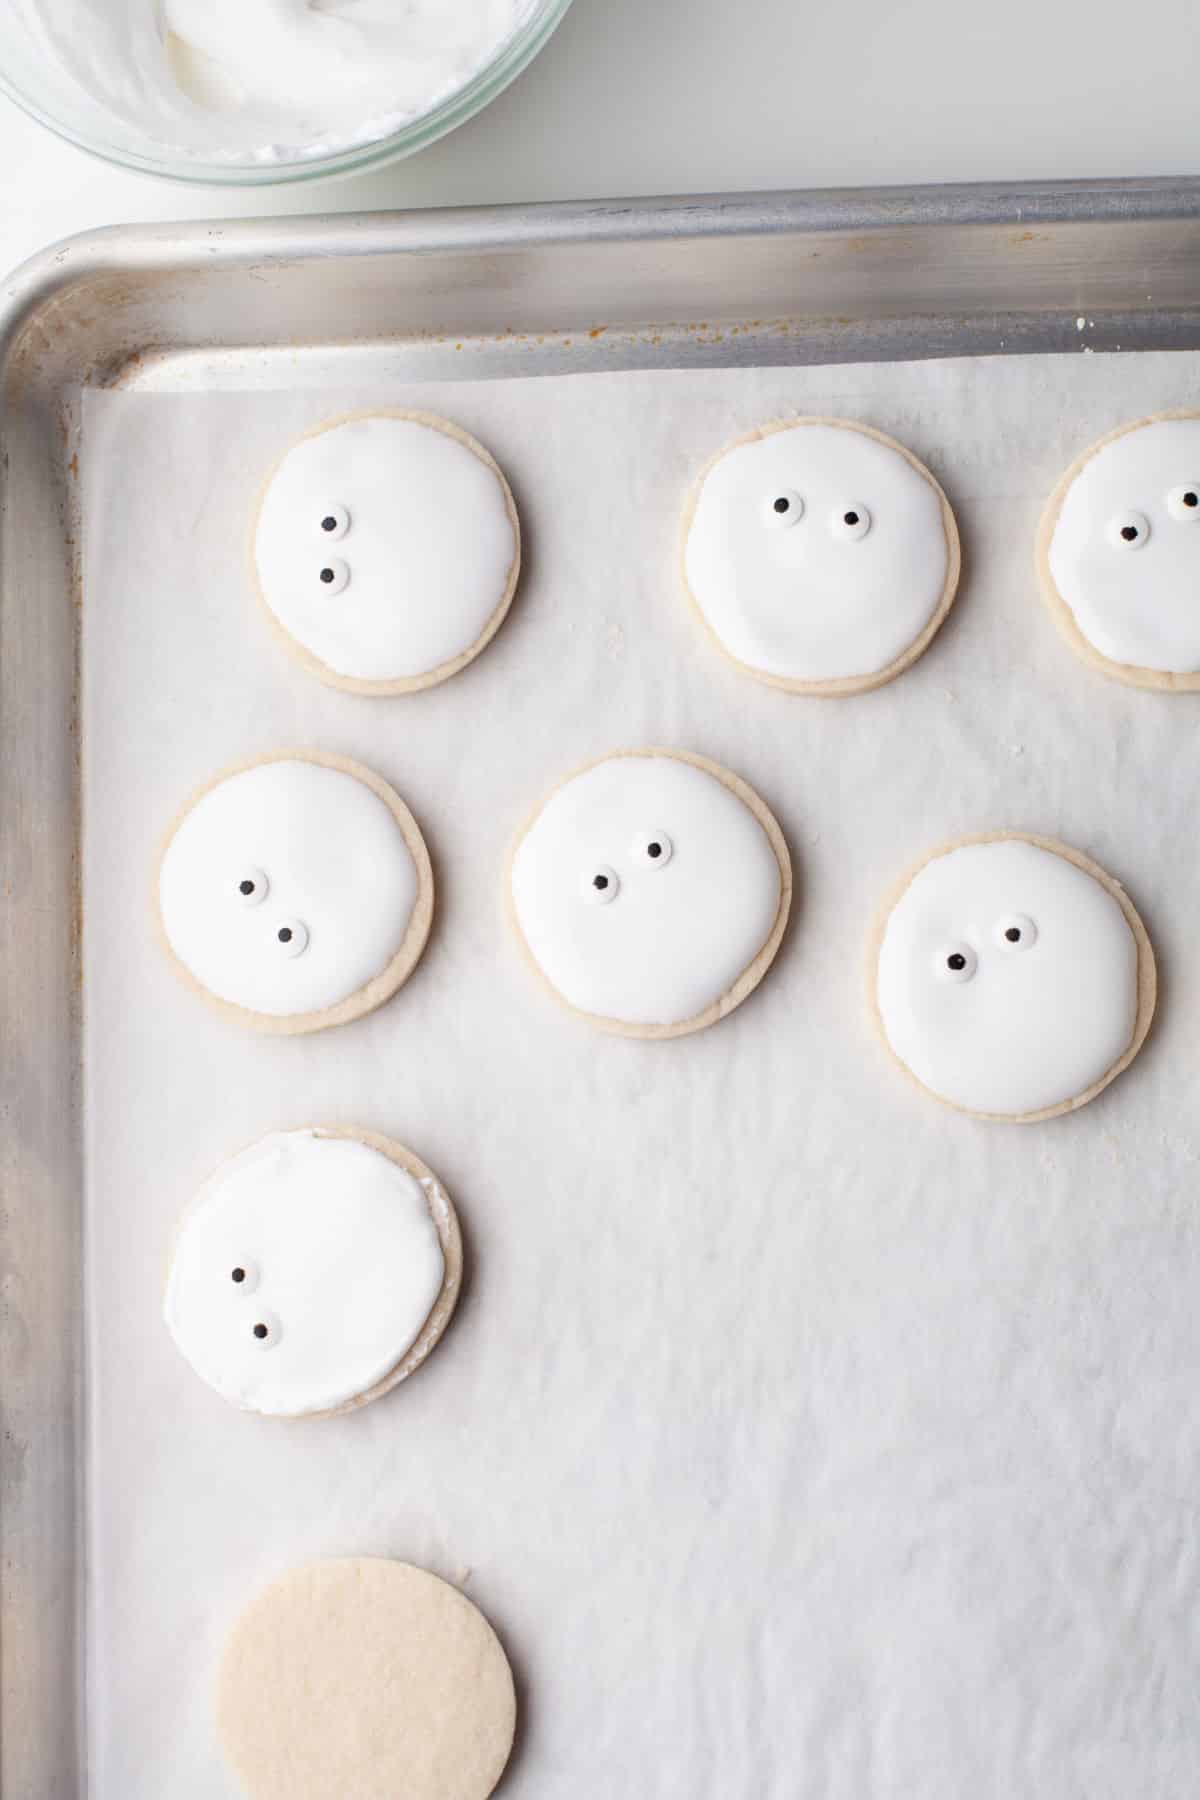 sugar cookies with candy eyes on them on a parchment lined tray.